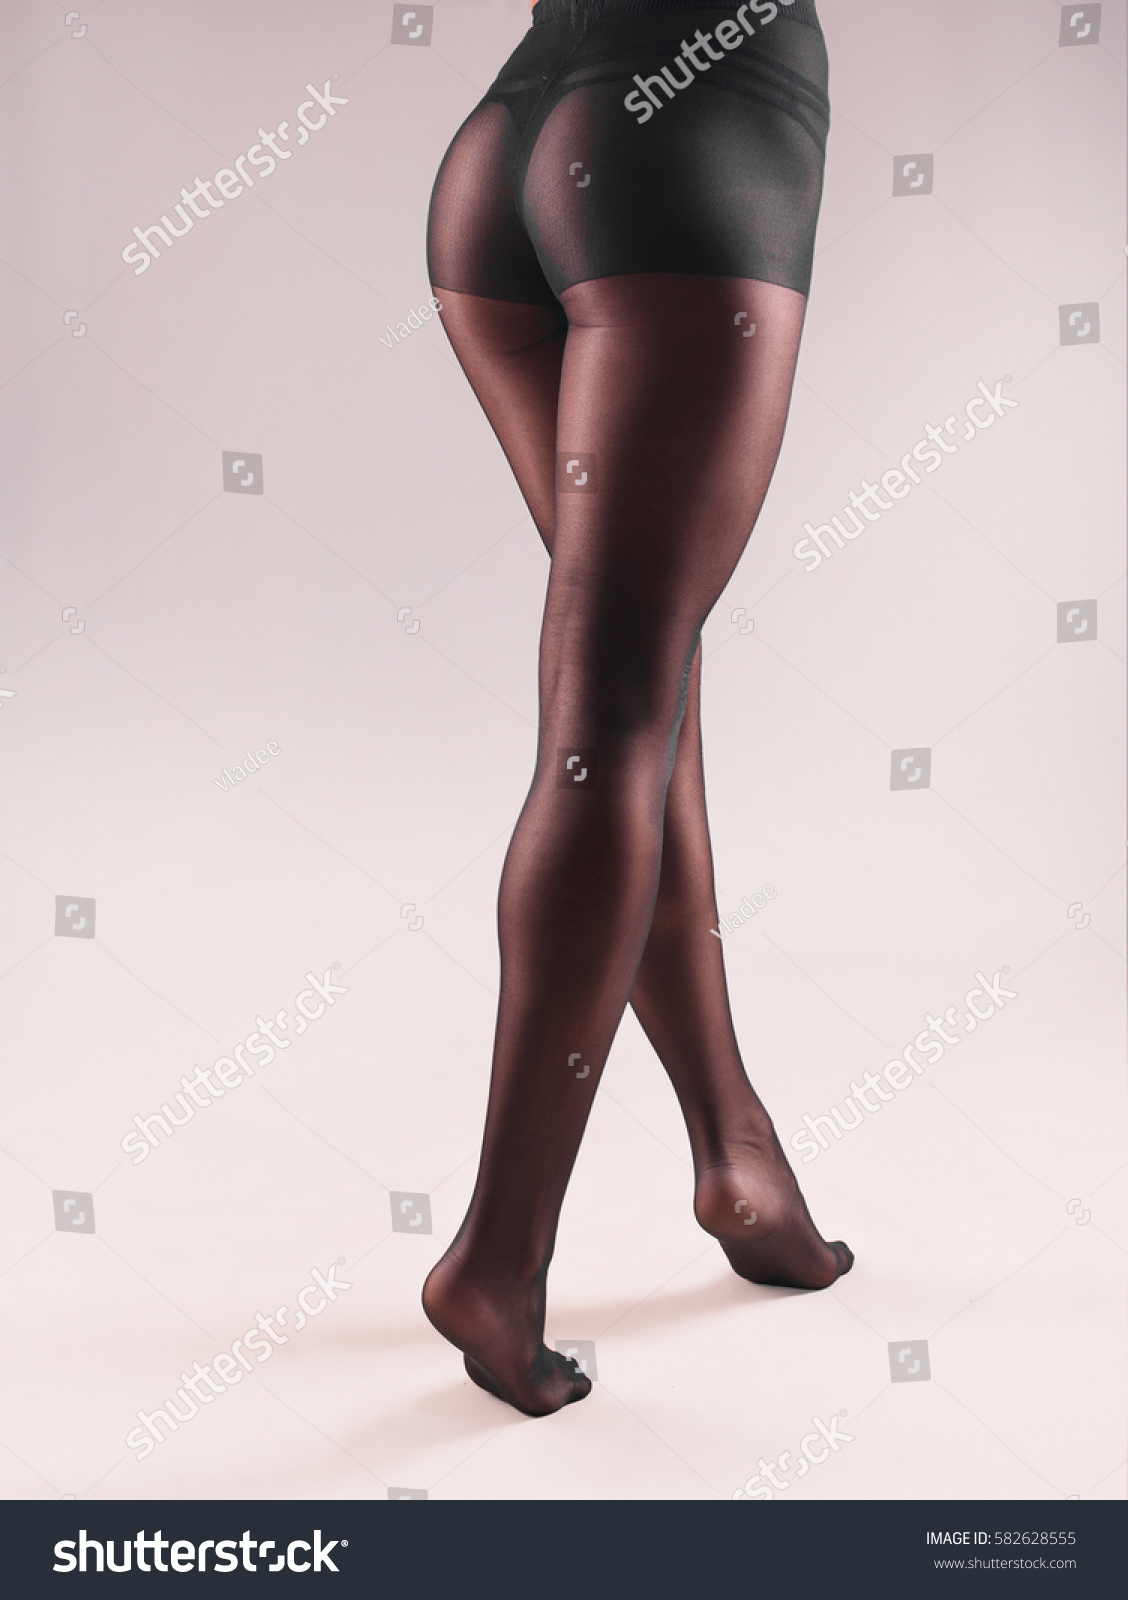 Legs In Pantyhose Pictures